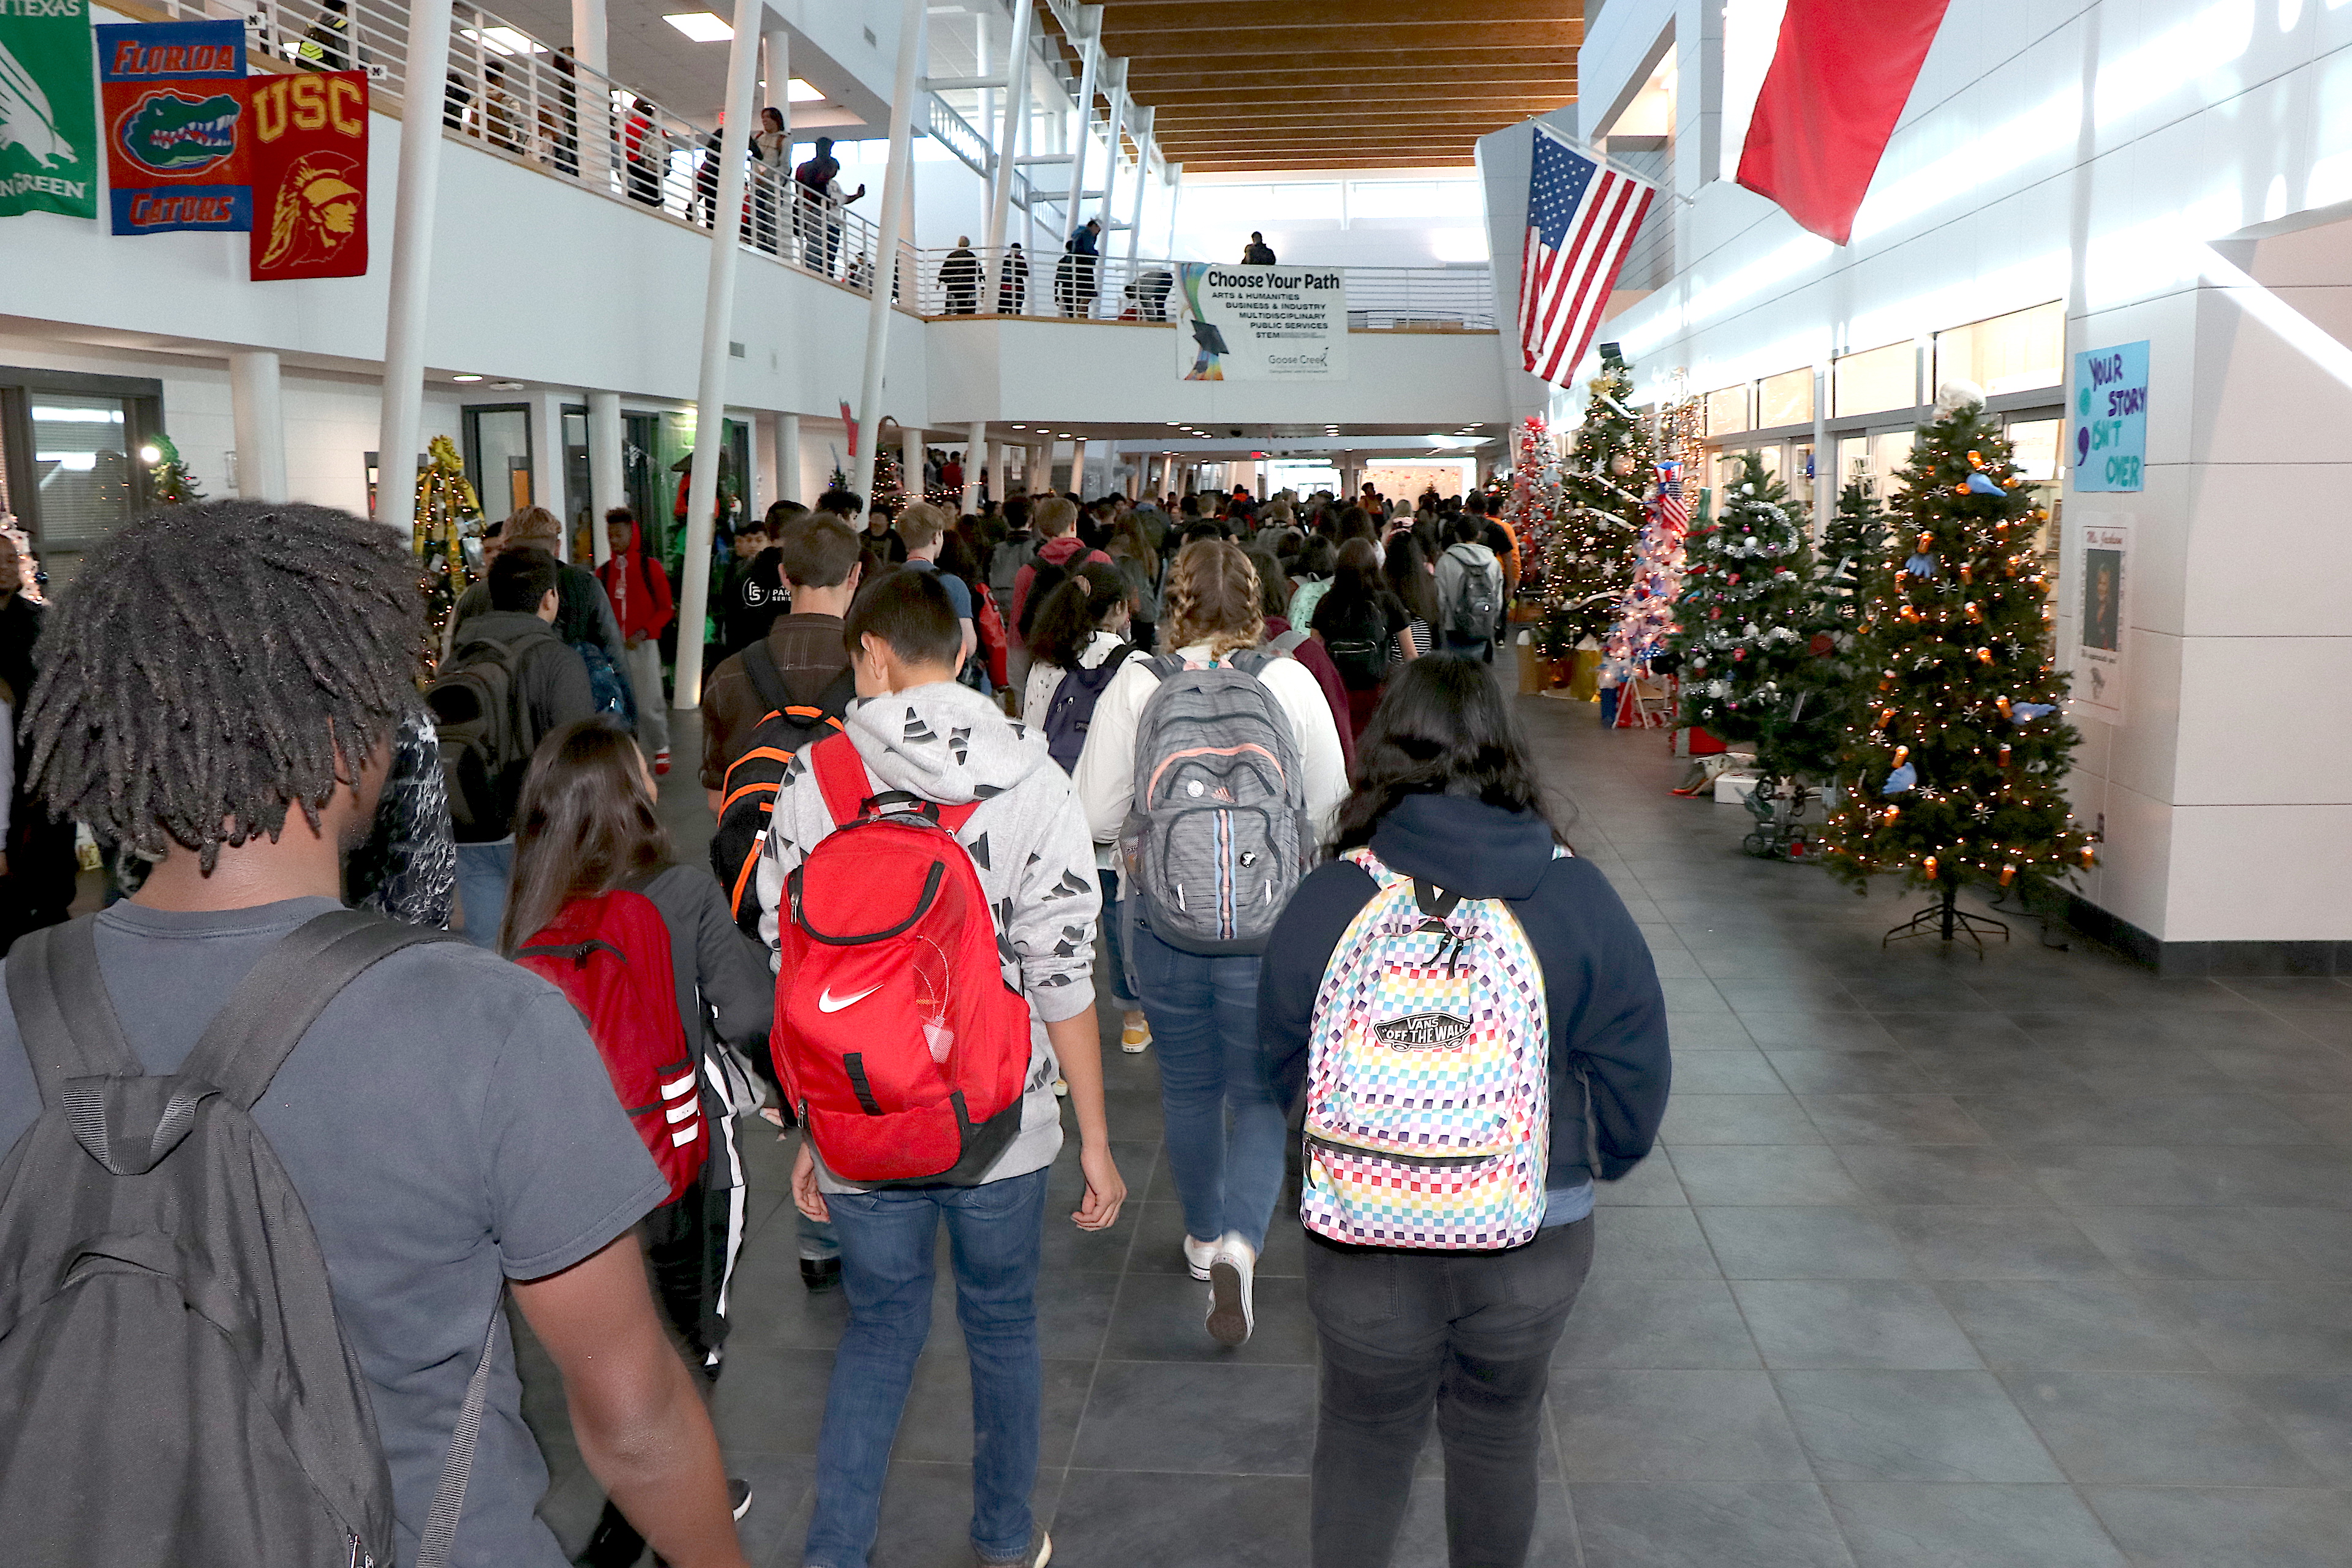 Trees, representing 59 clubs and organizations, line the main hallway